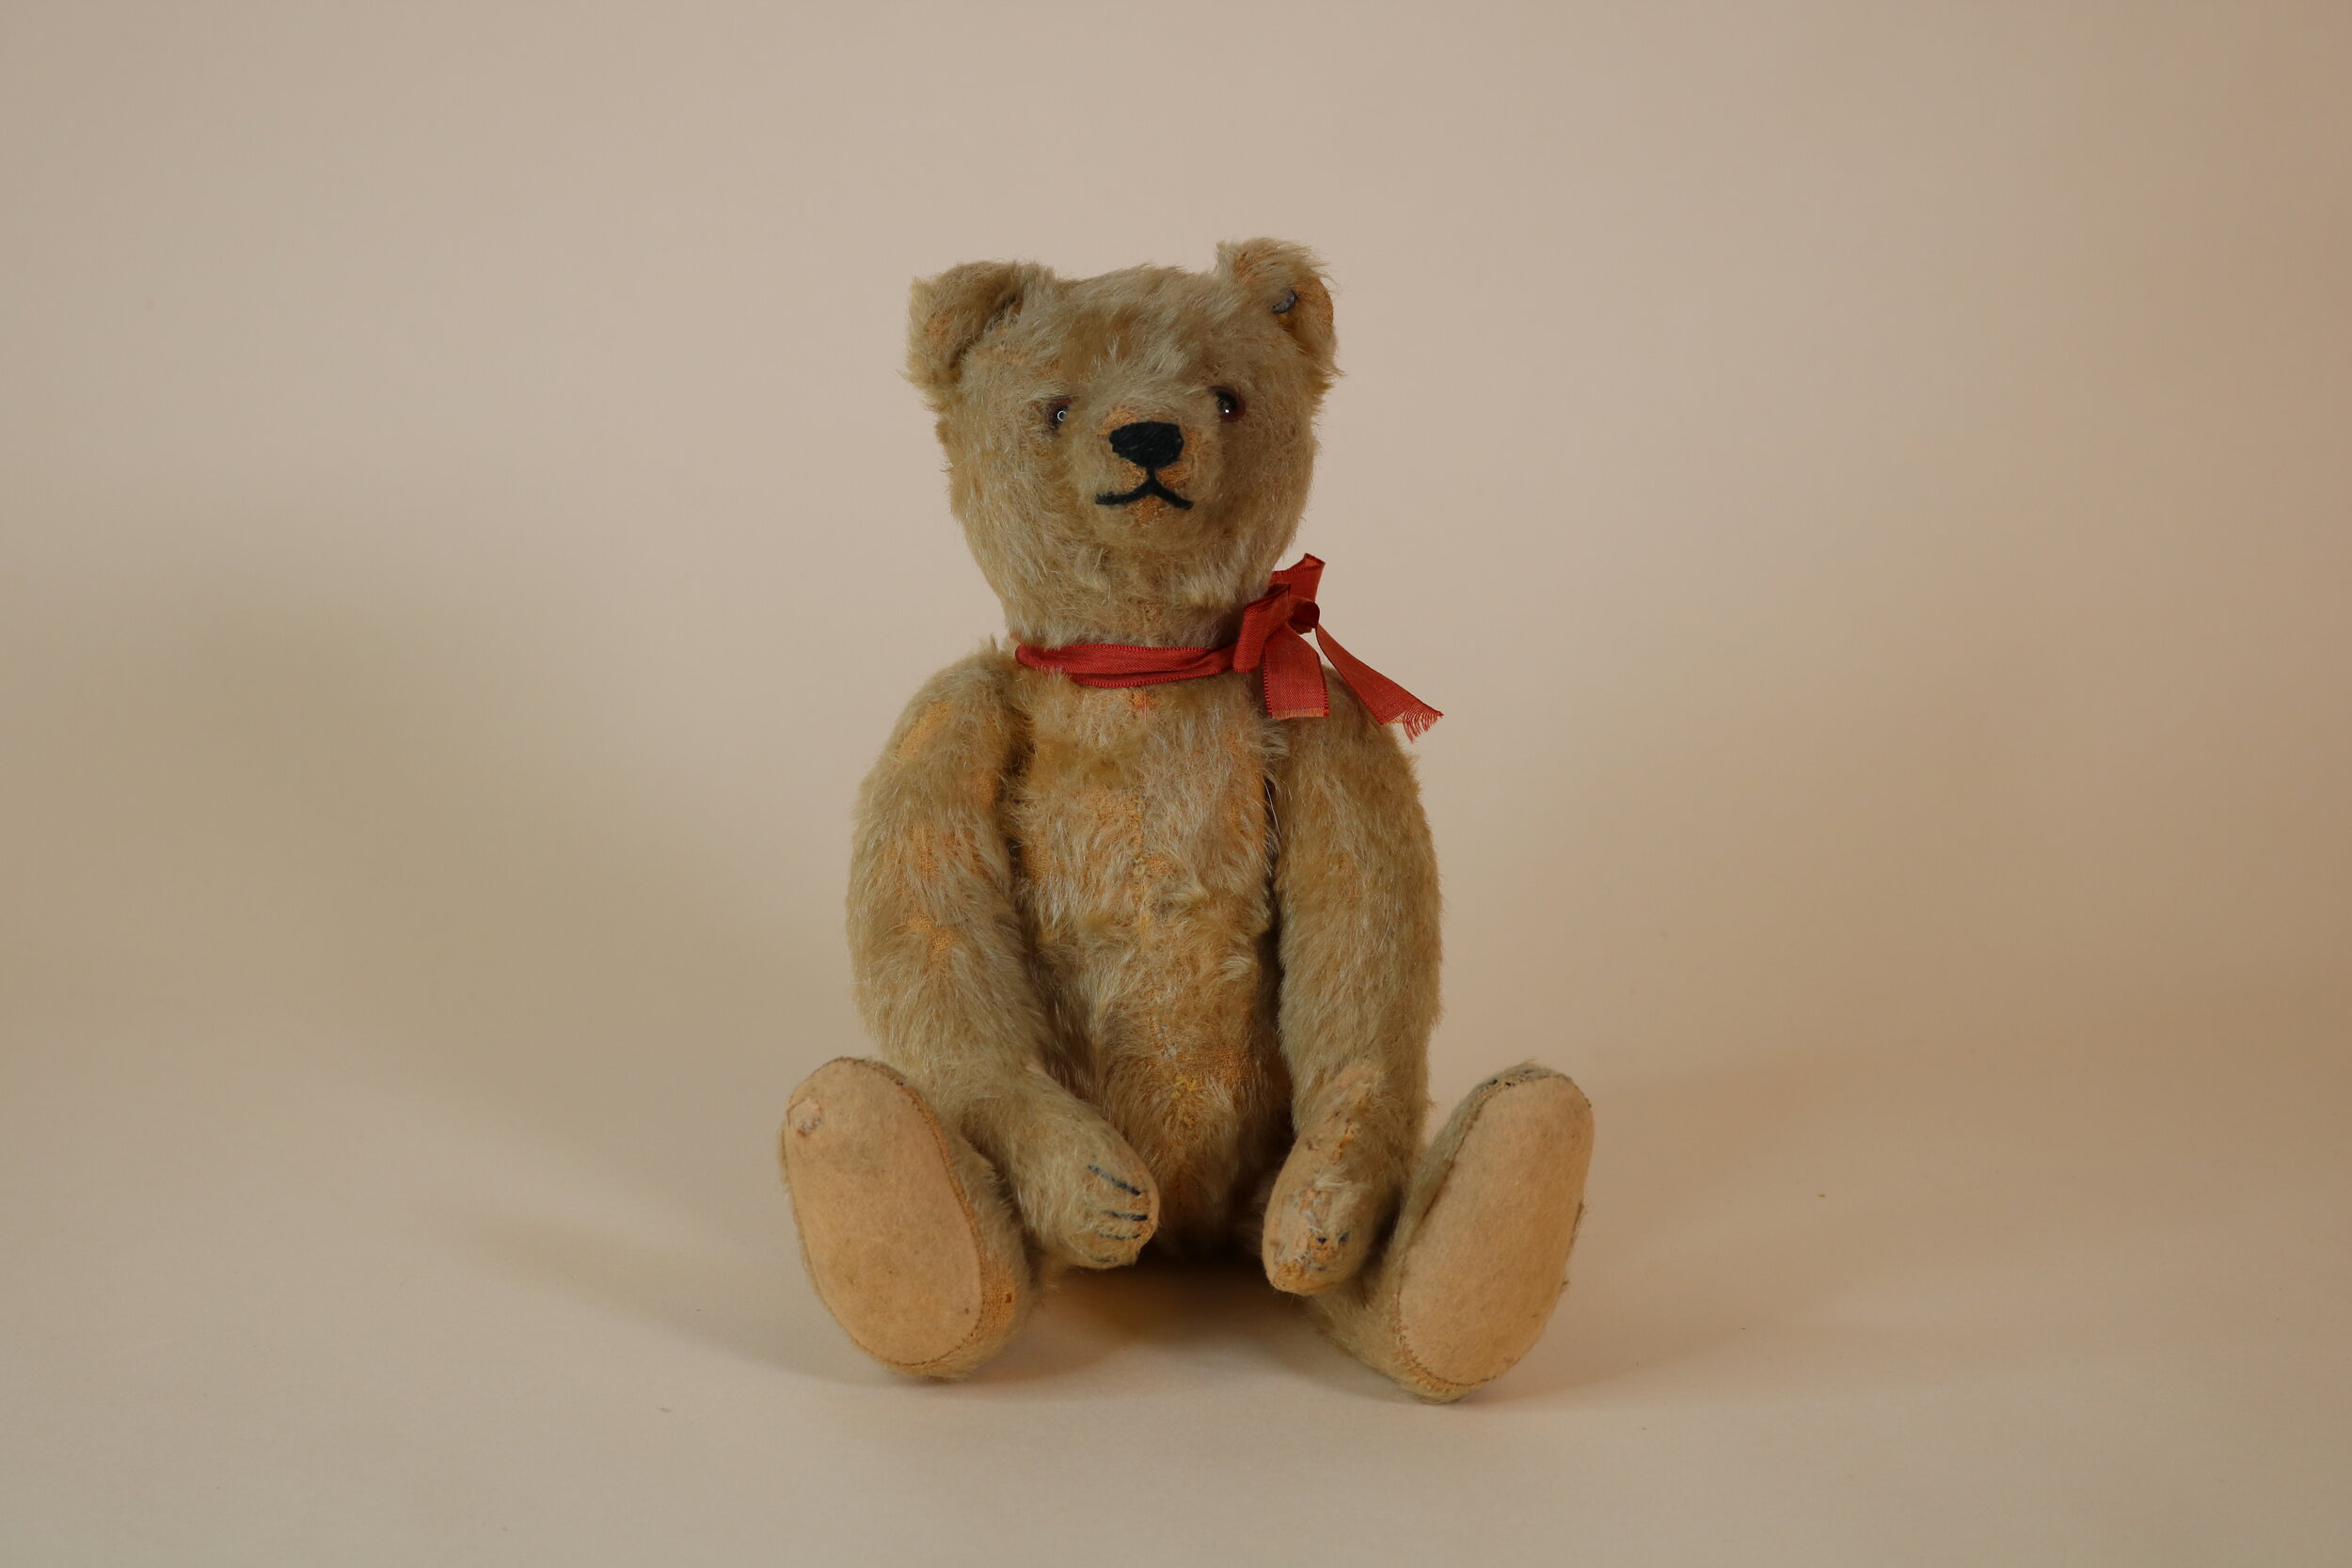 Antique Teddy Bears for sale